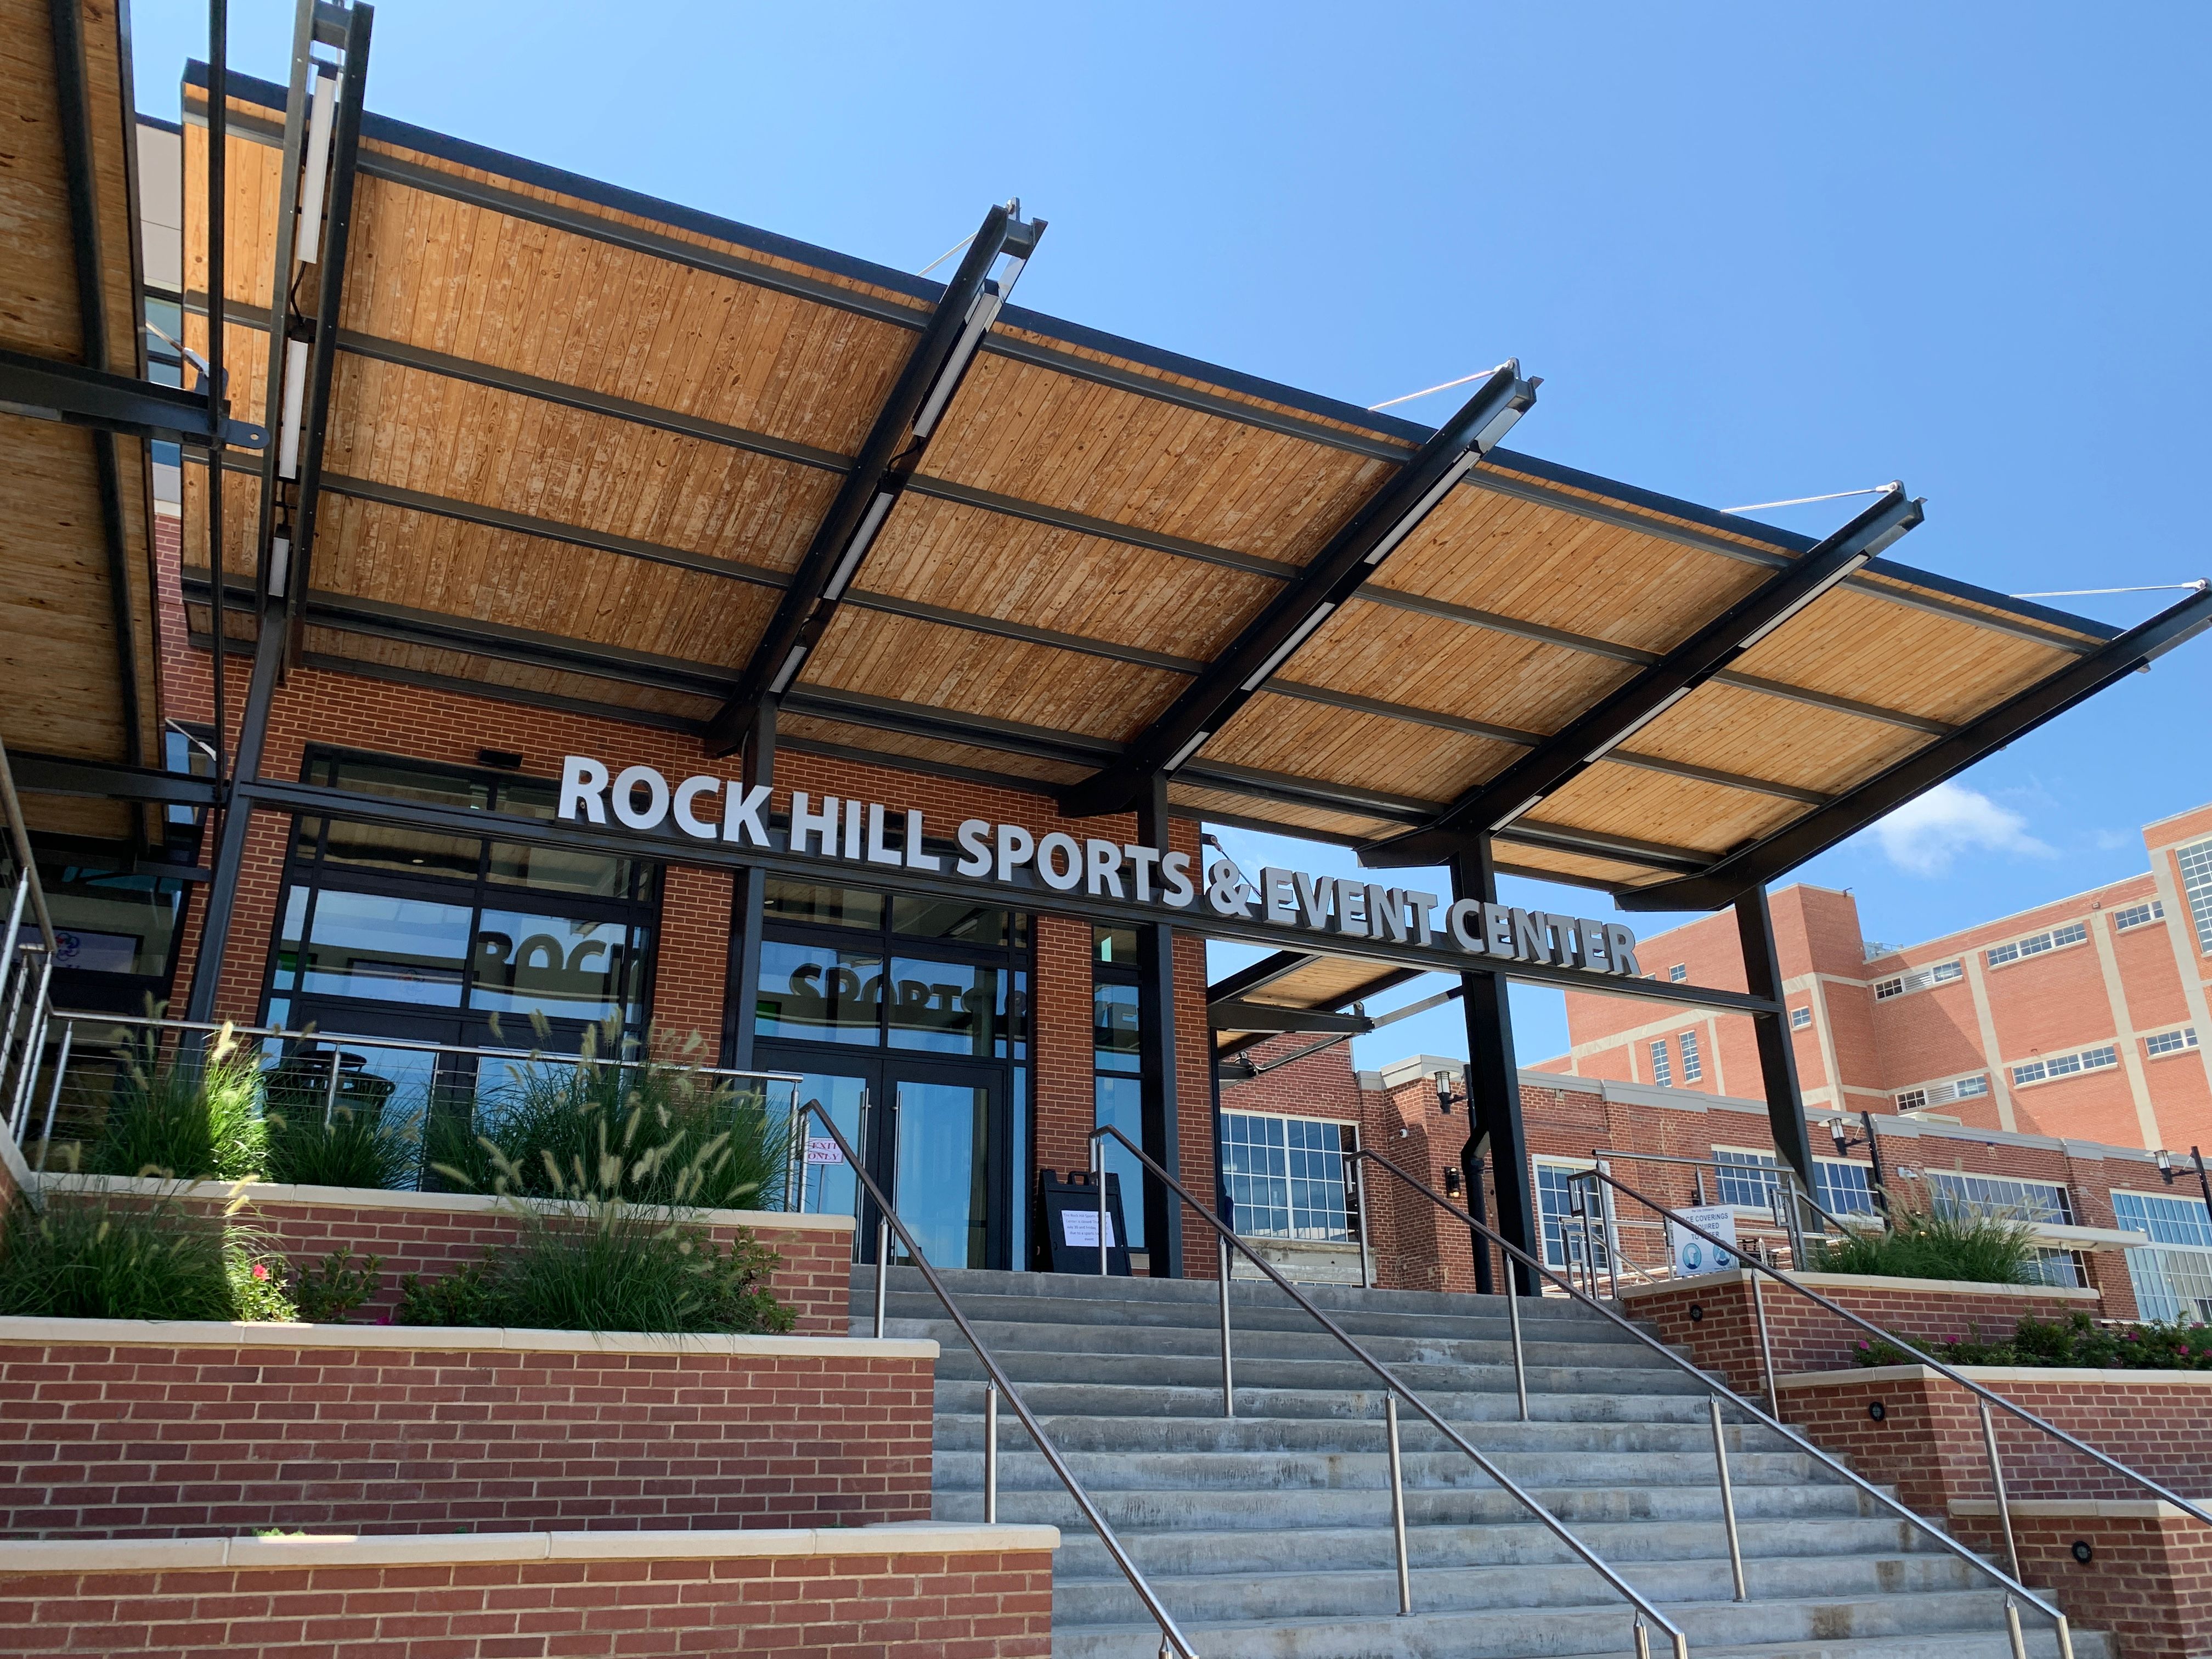 Enjoy the sporting life in Rock Hill, S.C. picture